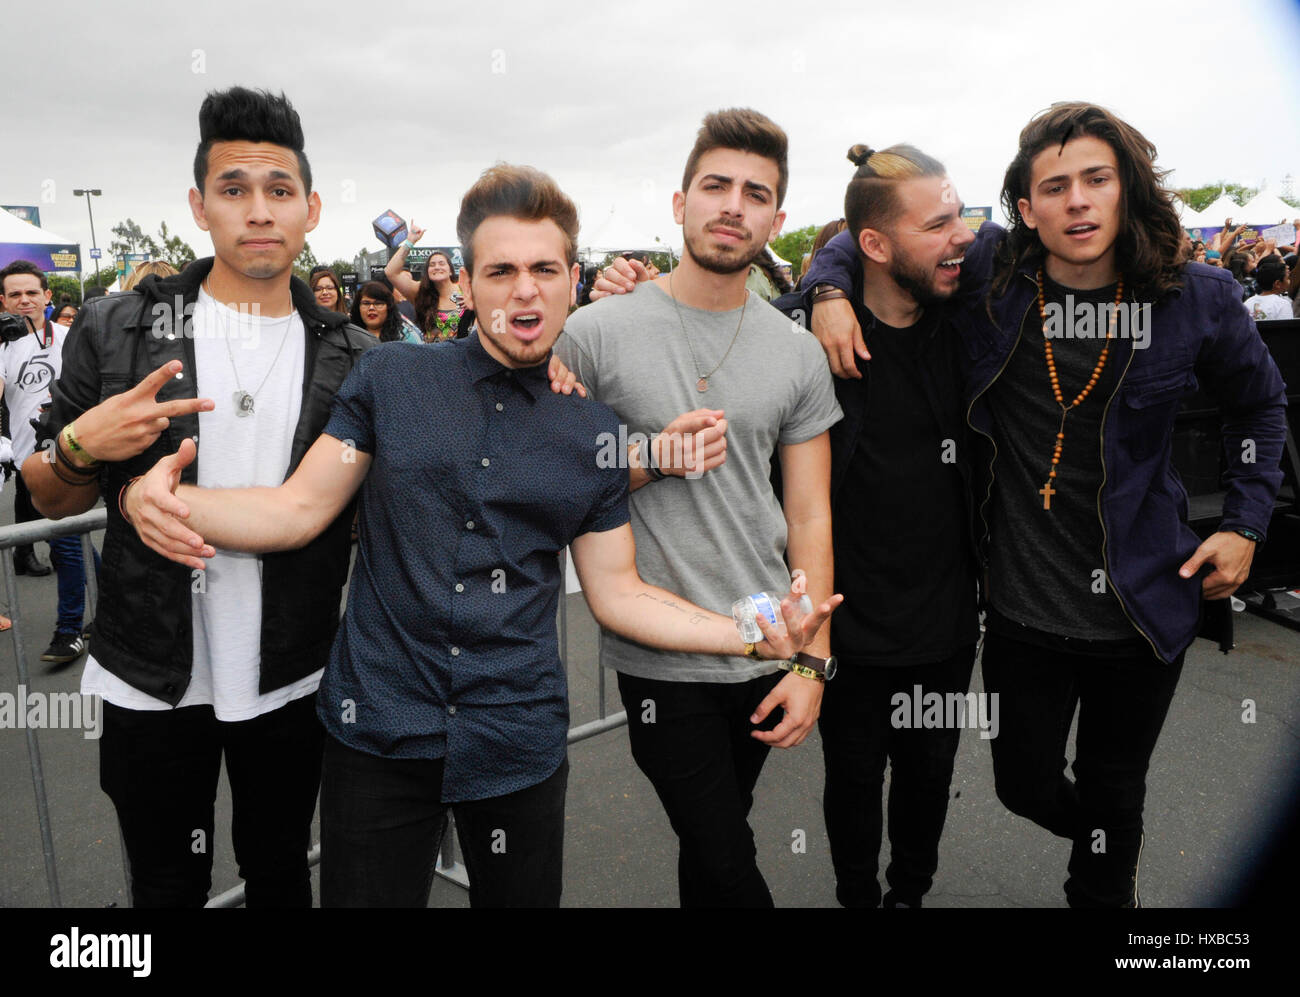 Los 5 backstage portrait at the 2015 KIIS FM Wango Tango Village Stage at the StubHub Center on May 9th, 2015 in Carson, California. Stock Photo